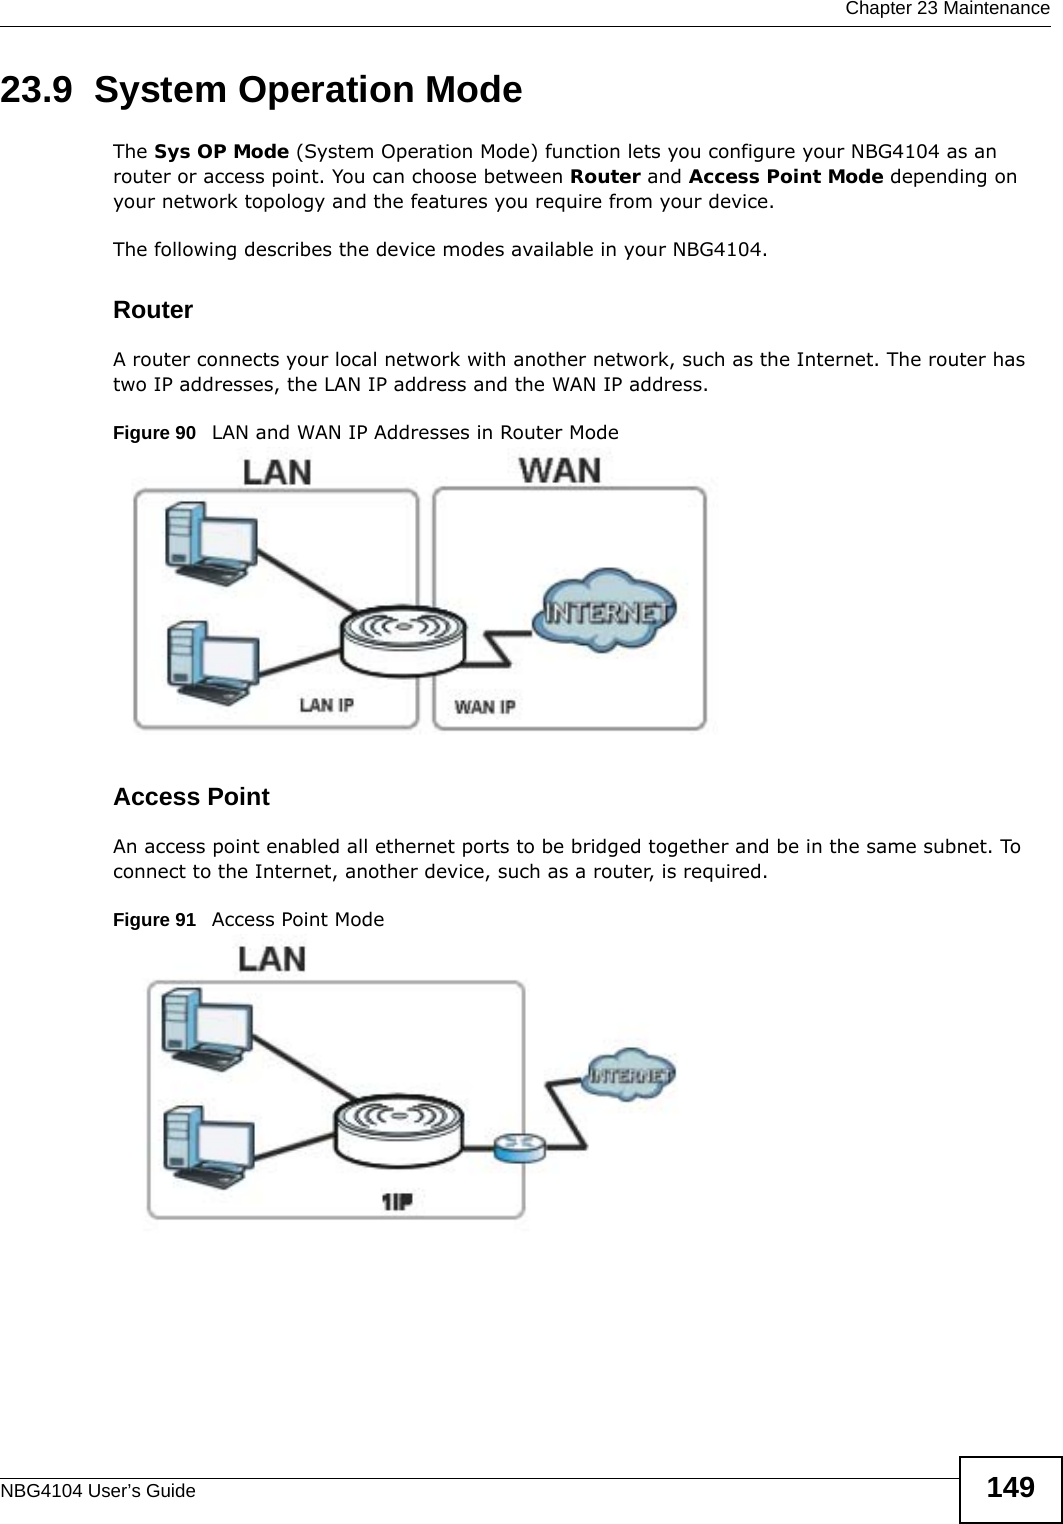  Chapter 23 MaintenanceNBG4104 User’s Guide 14923.9  System Operation ModeThe Sys OP Mode (System Operation Mode) function lets you configure your NBG4104 as an router or access point. You can choose between Router and Access Point Mode depending on your network topology and the features you require from your device. The following describes the device modes available in your NBG4104.RouterA router connects your local network with another network, such as the Internet. The router has two IP addresses, the LAN IP address and the WAN IP address.Figure 90   LAN and WAN IP Addresses in Router ModeAccess PointAn access point enabled all ethernet ports to be bridged together and be in the same subnet. To connect to the Internet, another device, such as a router, is required.Figure 91   Access Point Mode